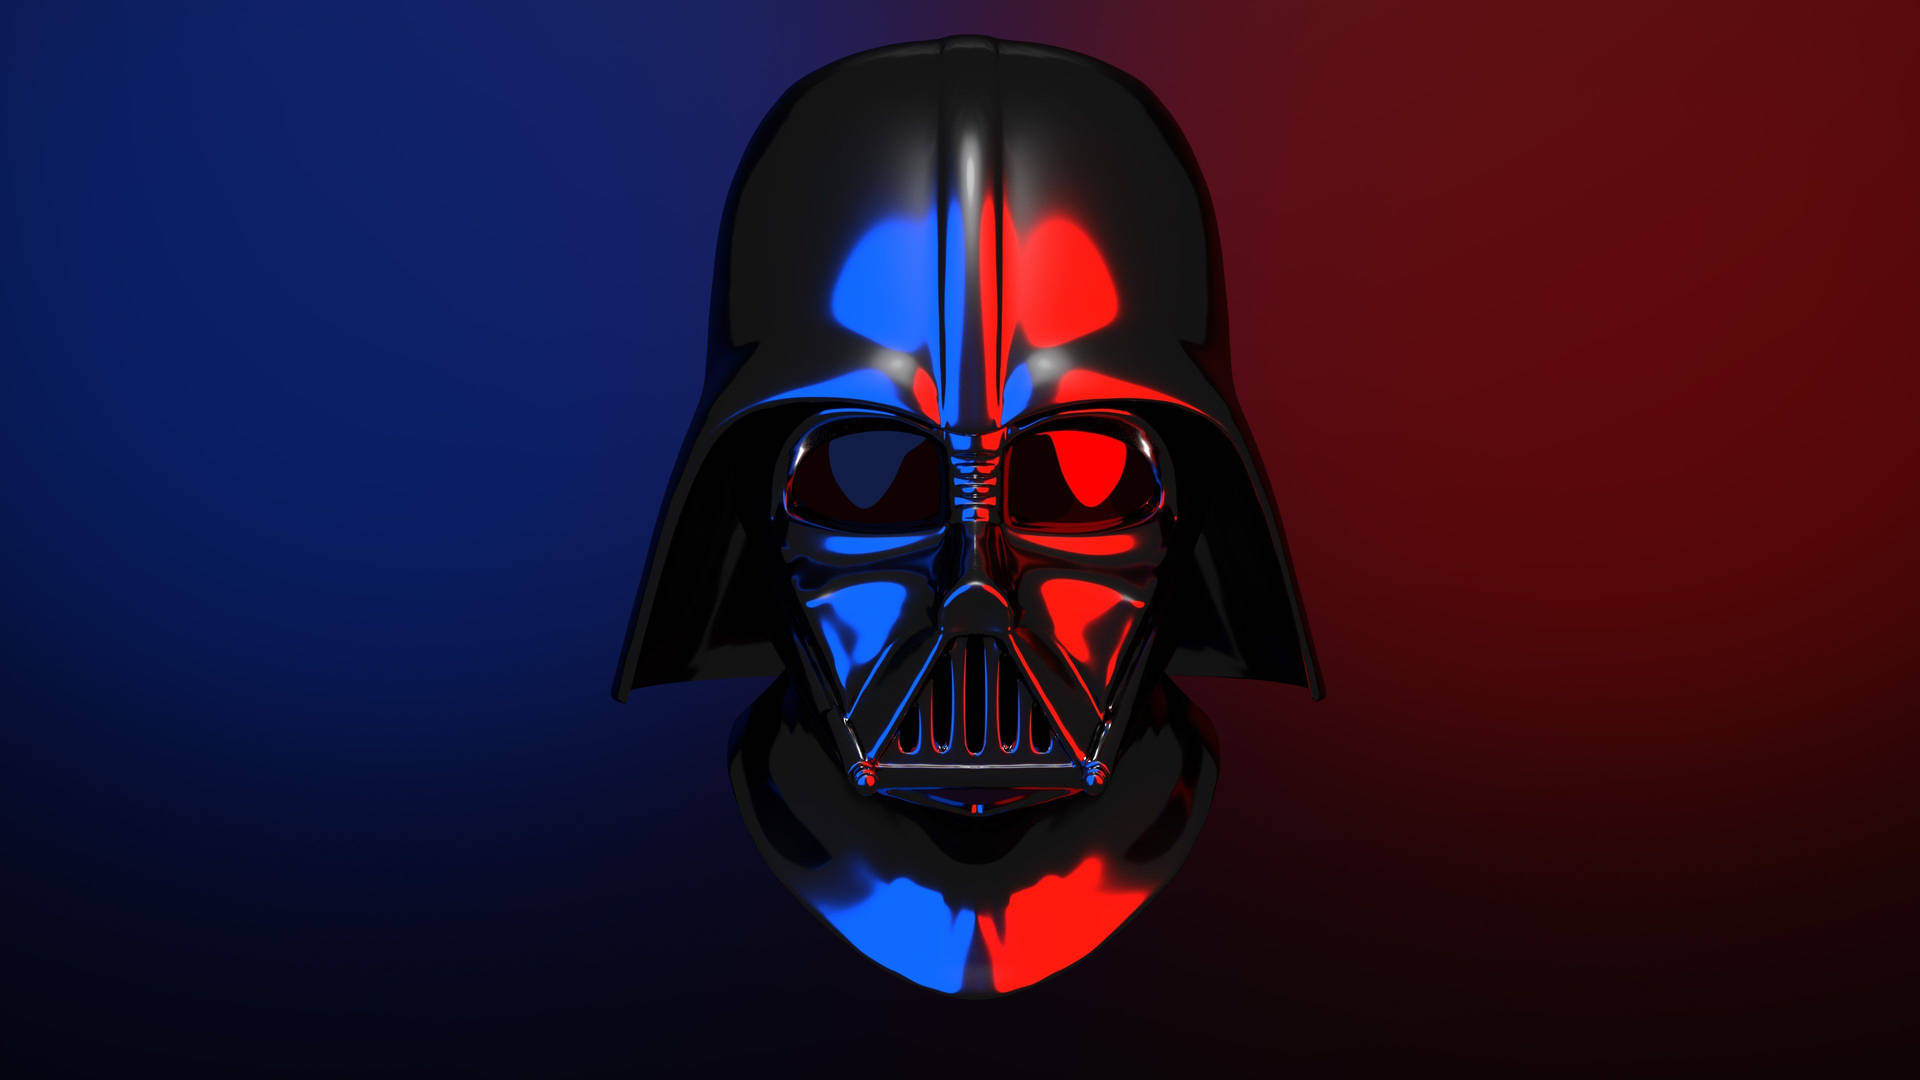 Darth Vader In Blue And Red